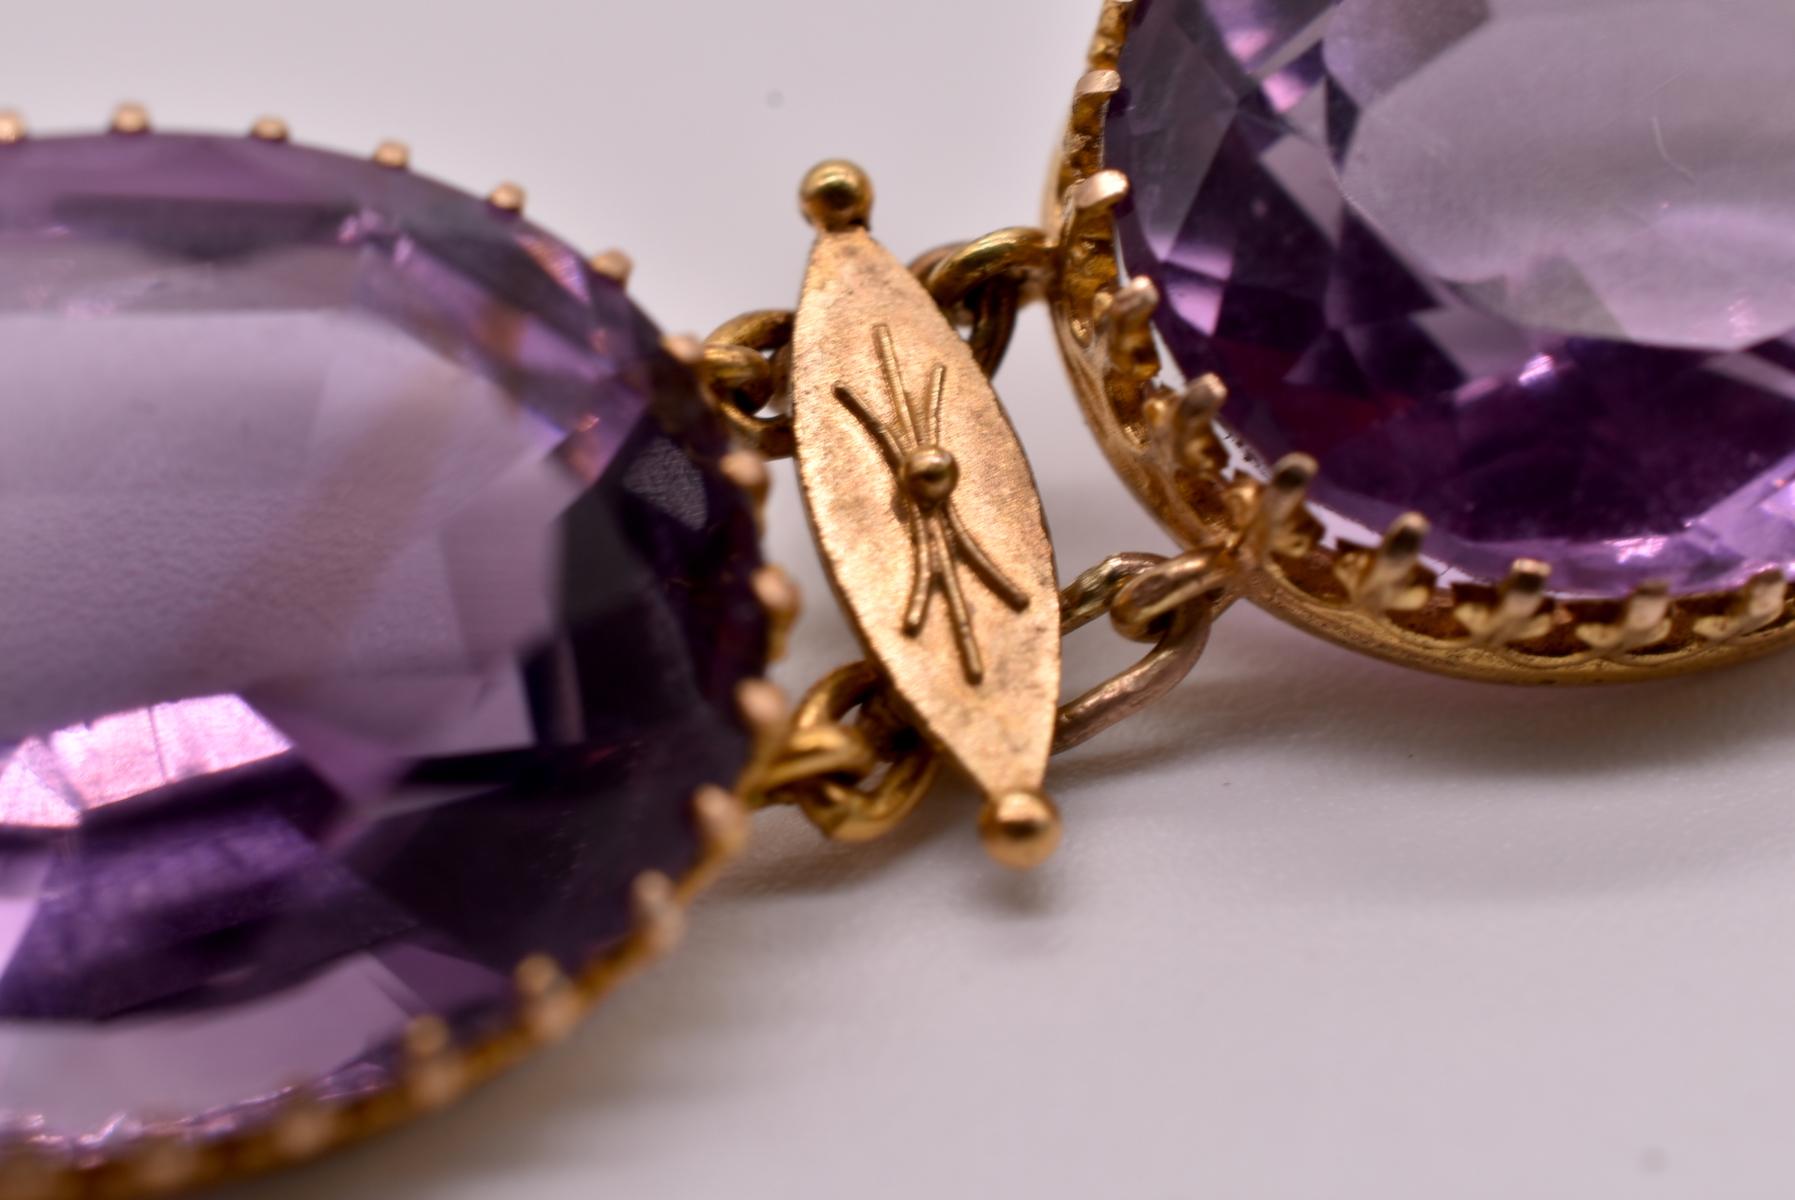 French style amethyst necklace designed in the archeological taste, set with lovely individual claw set links in 18k yellow gold with gold spacers.  An extra amethyst gem link is available to lengthen the chain should this be desired. There is a